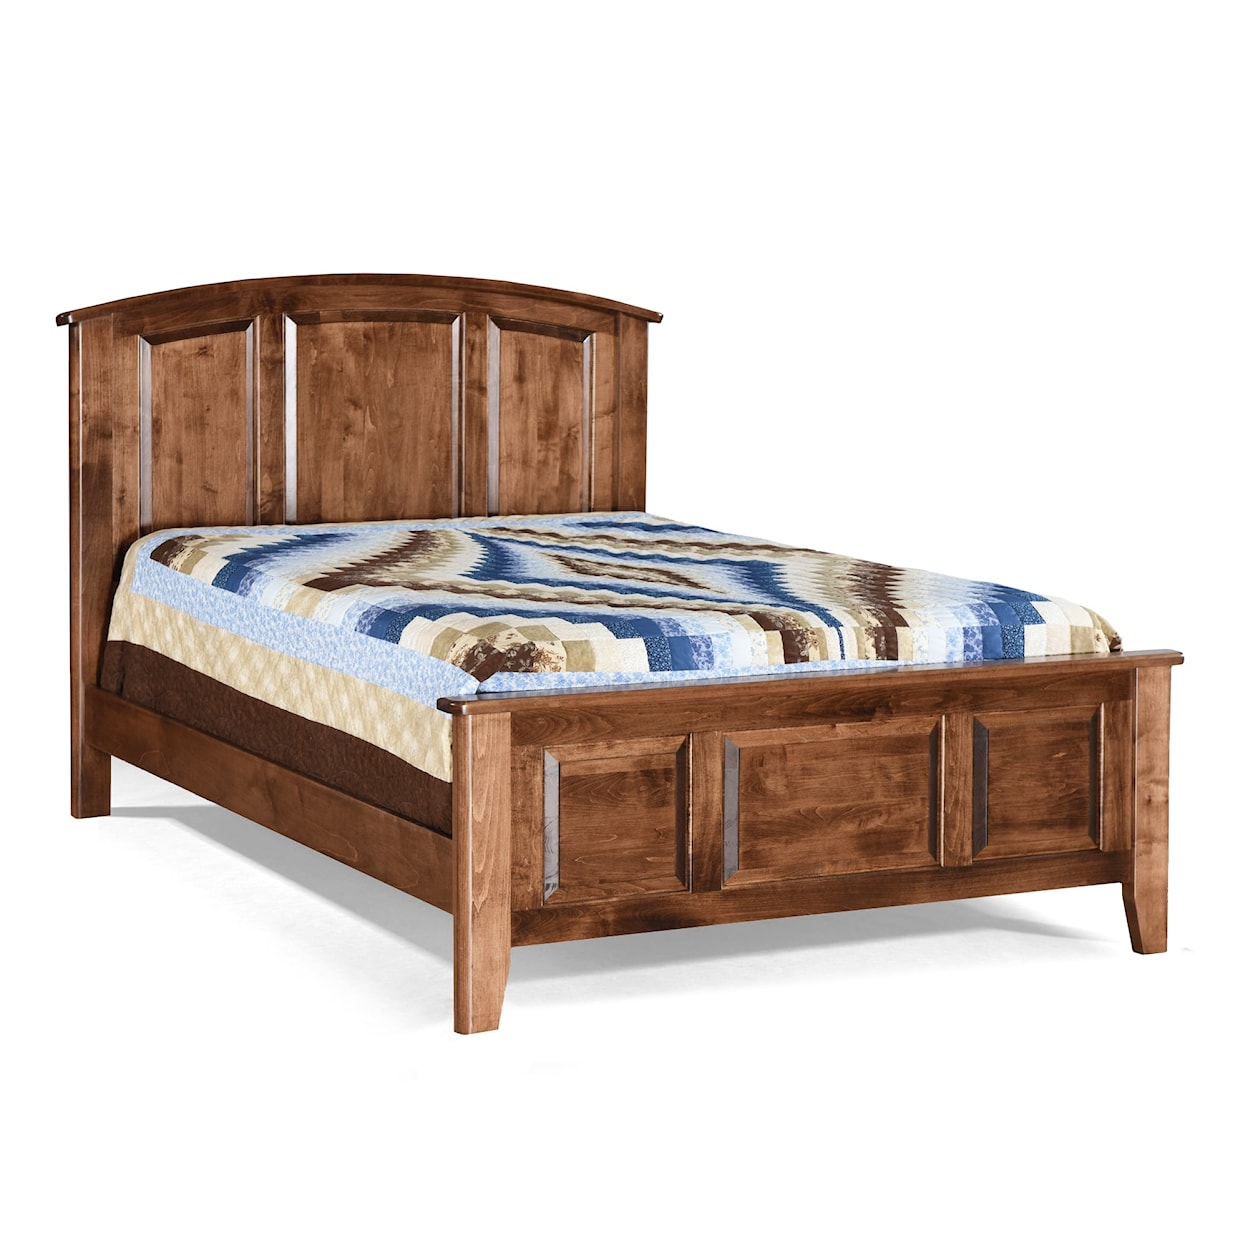 Archbold Furniture Carson King Arched Panel Bed